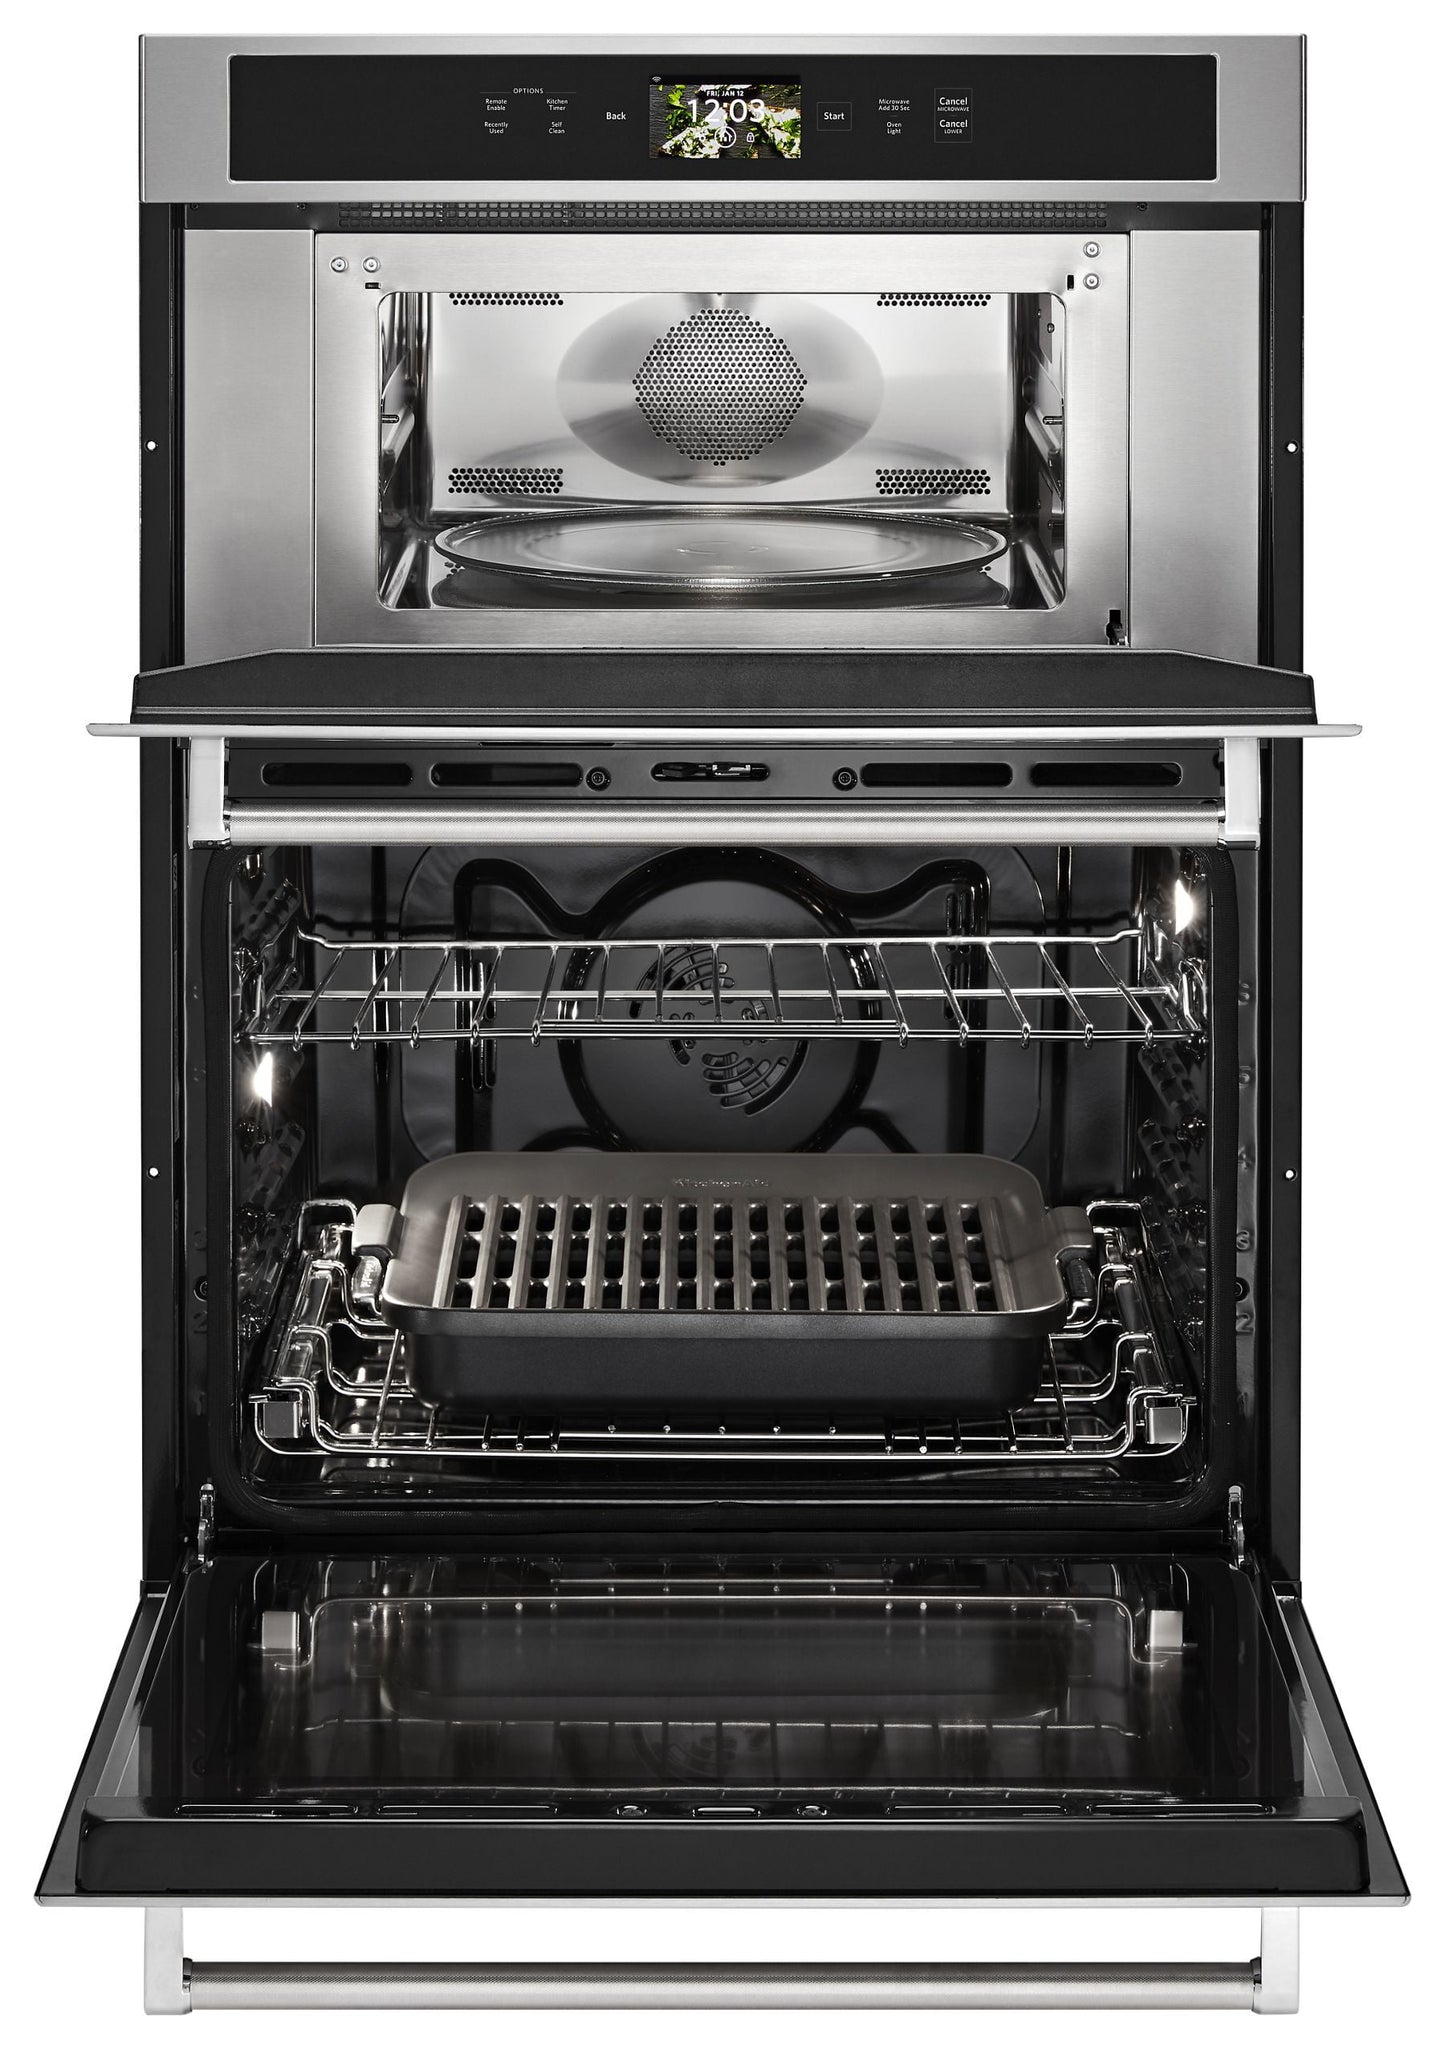 Kitchenaid KOCE900HSS Smart Oven+ 30" Combination Oven With Powered Attachments - Stainless Steel